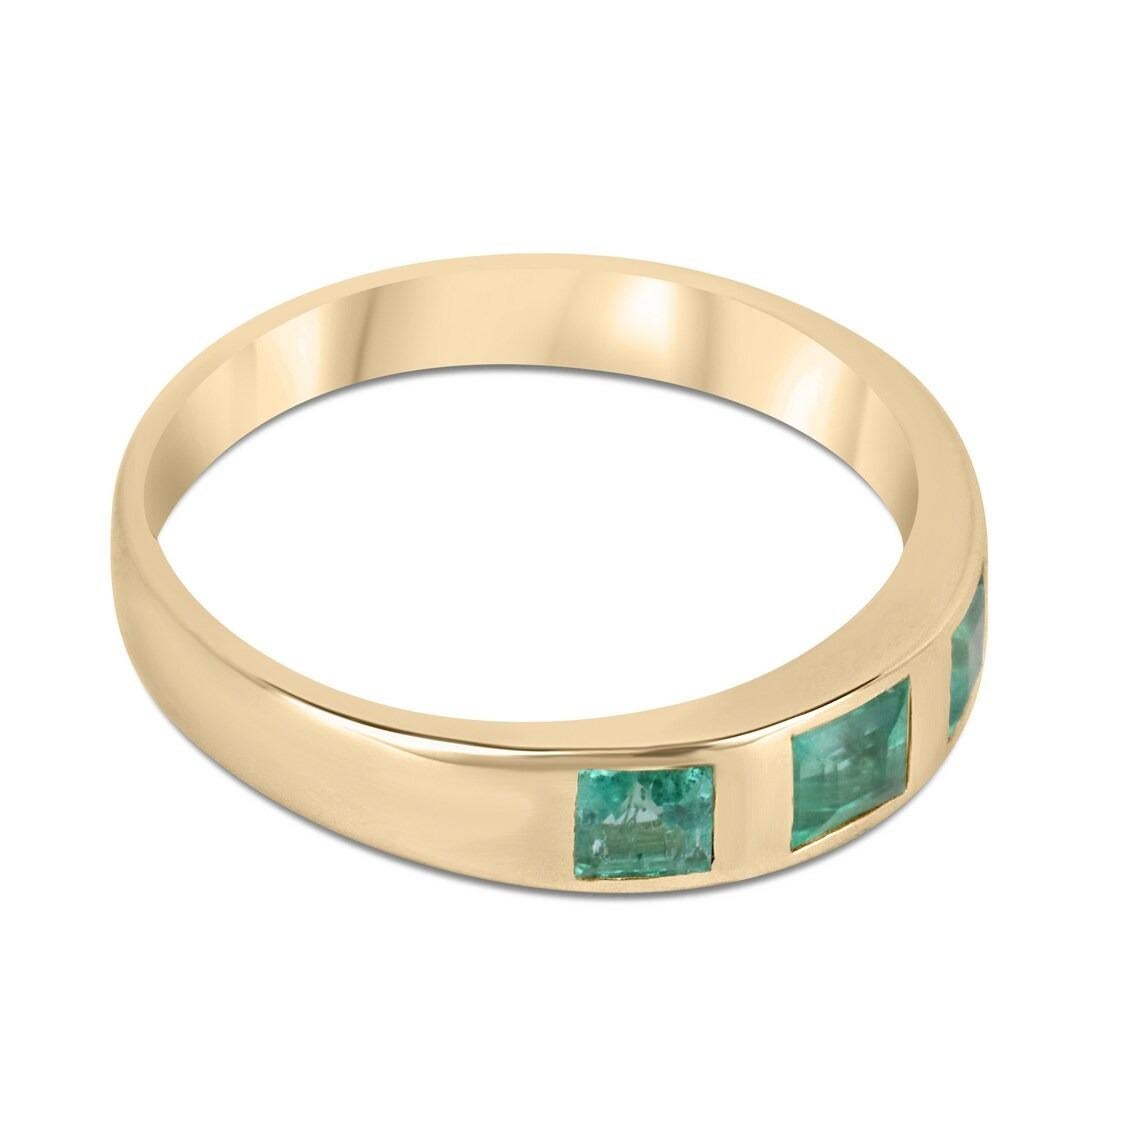 A dainty woman's emerald three-stone ring. This beauty features three natural princess cut emeralds with medium vivid green color and very good luster with a combined total carat weight of 0.60 carats. Bezel set in 14K gold, this is the perfect ring